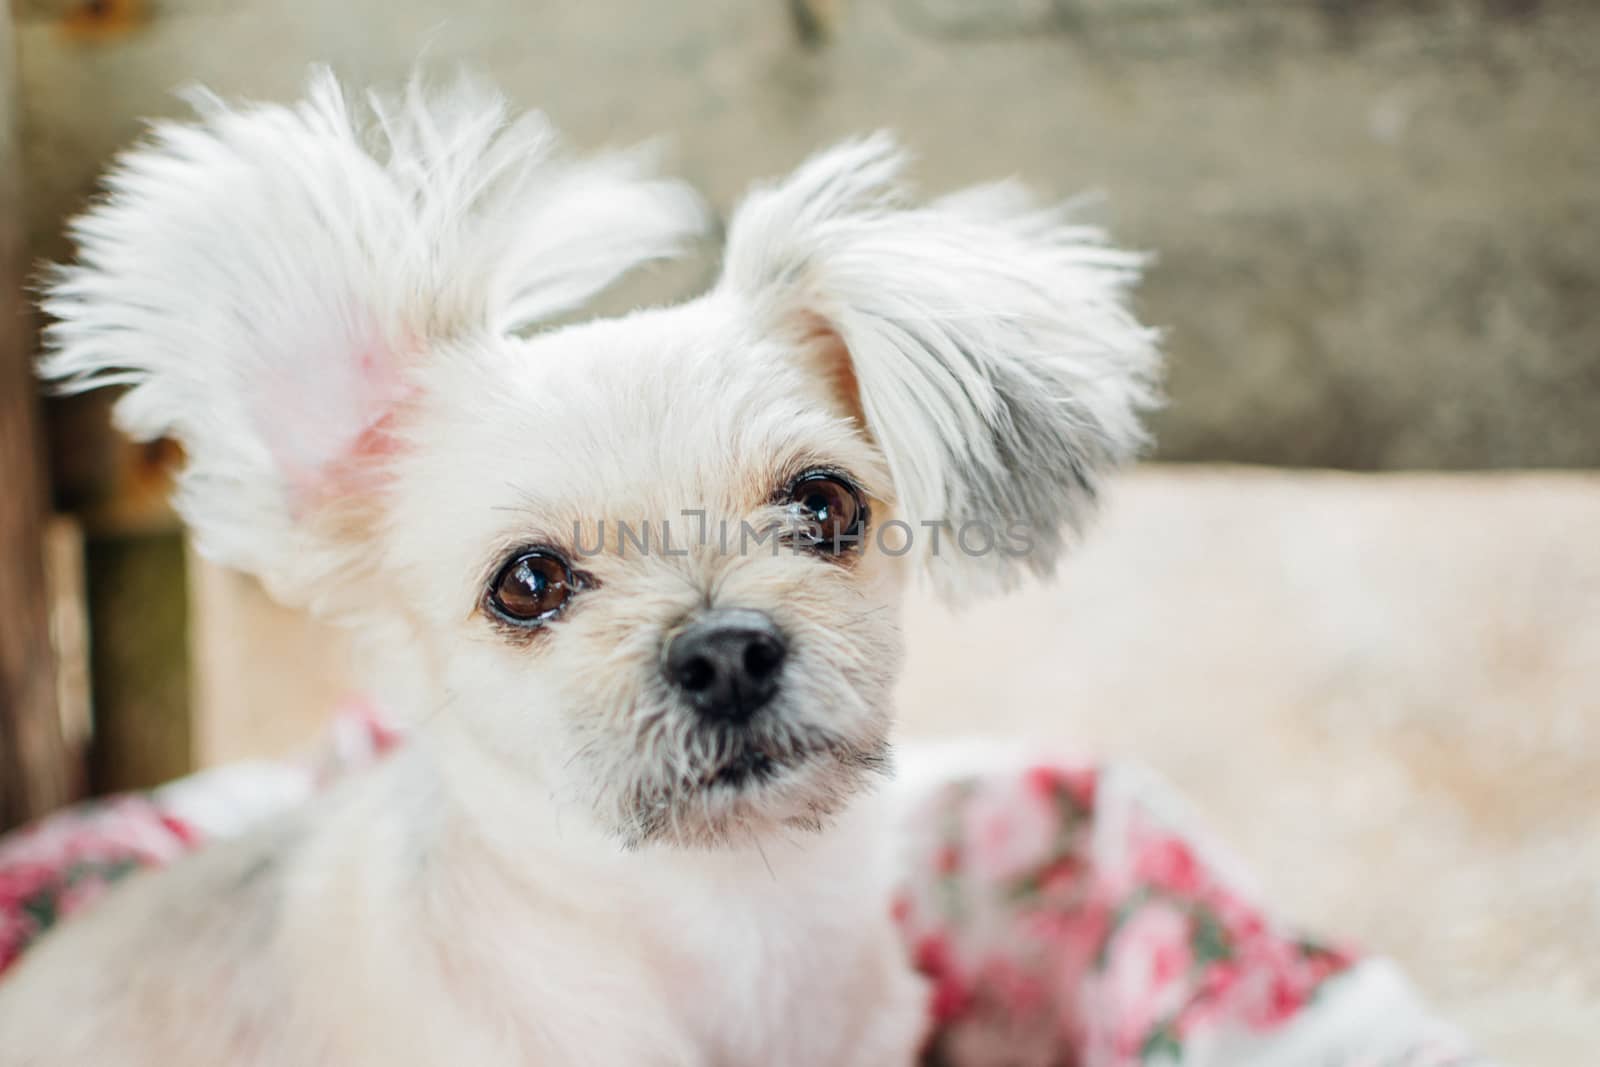 Dog so cute mixed breed with Shih-Tzu, Pomeranian and Poodle looking and waiting something with interest when vacation travel